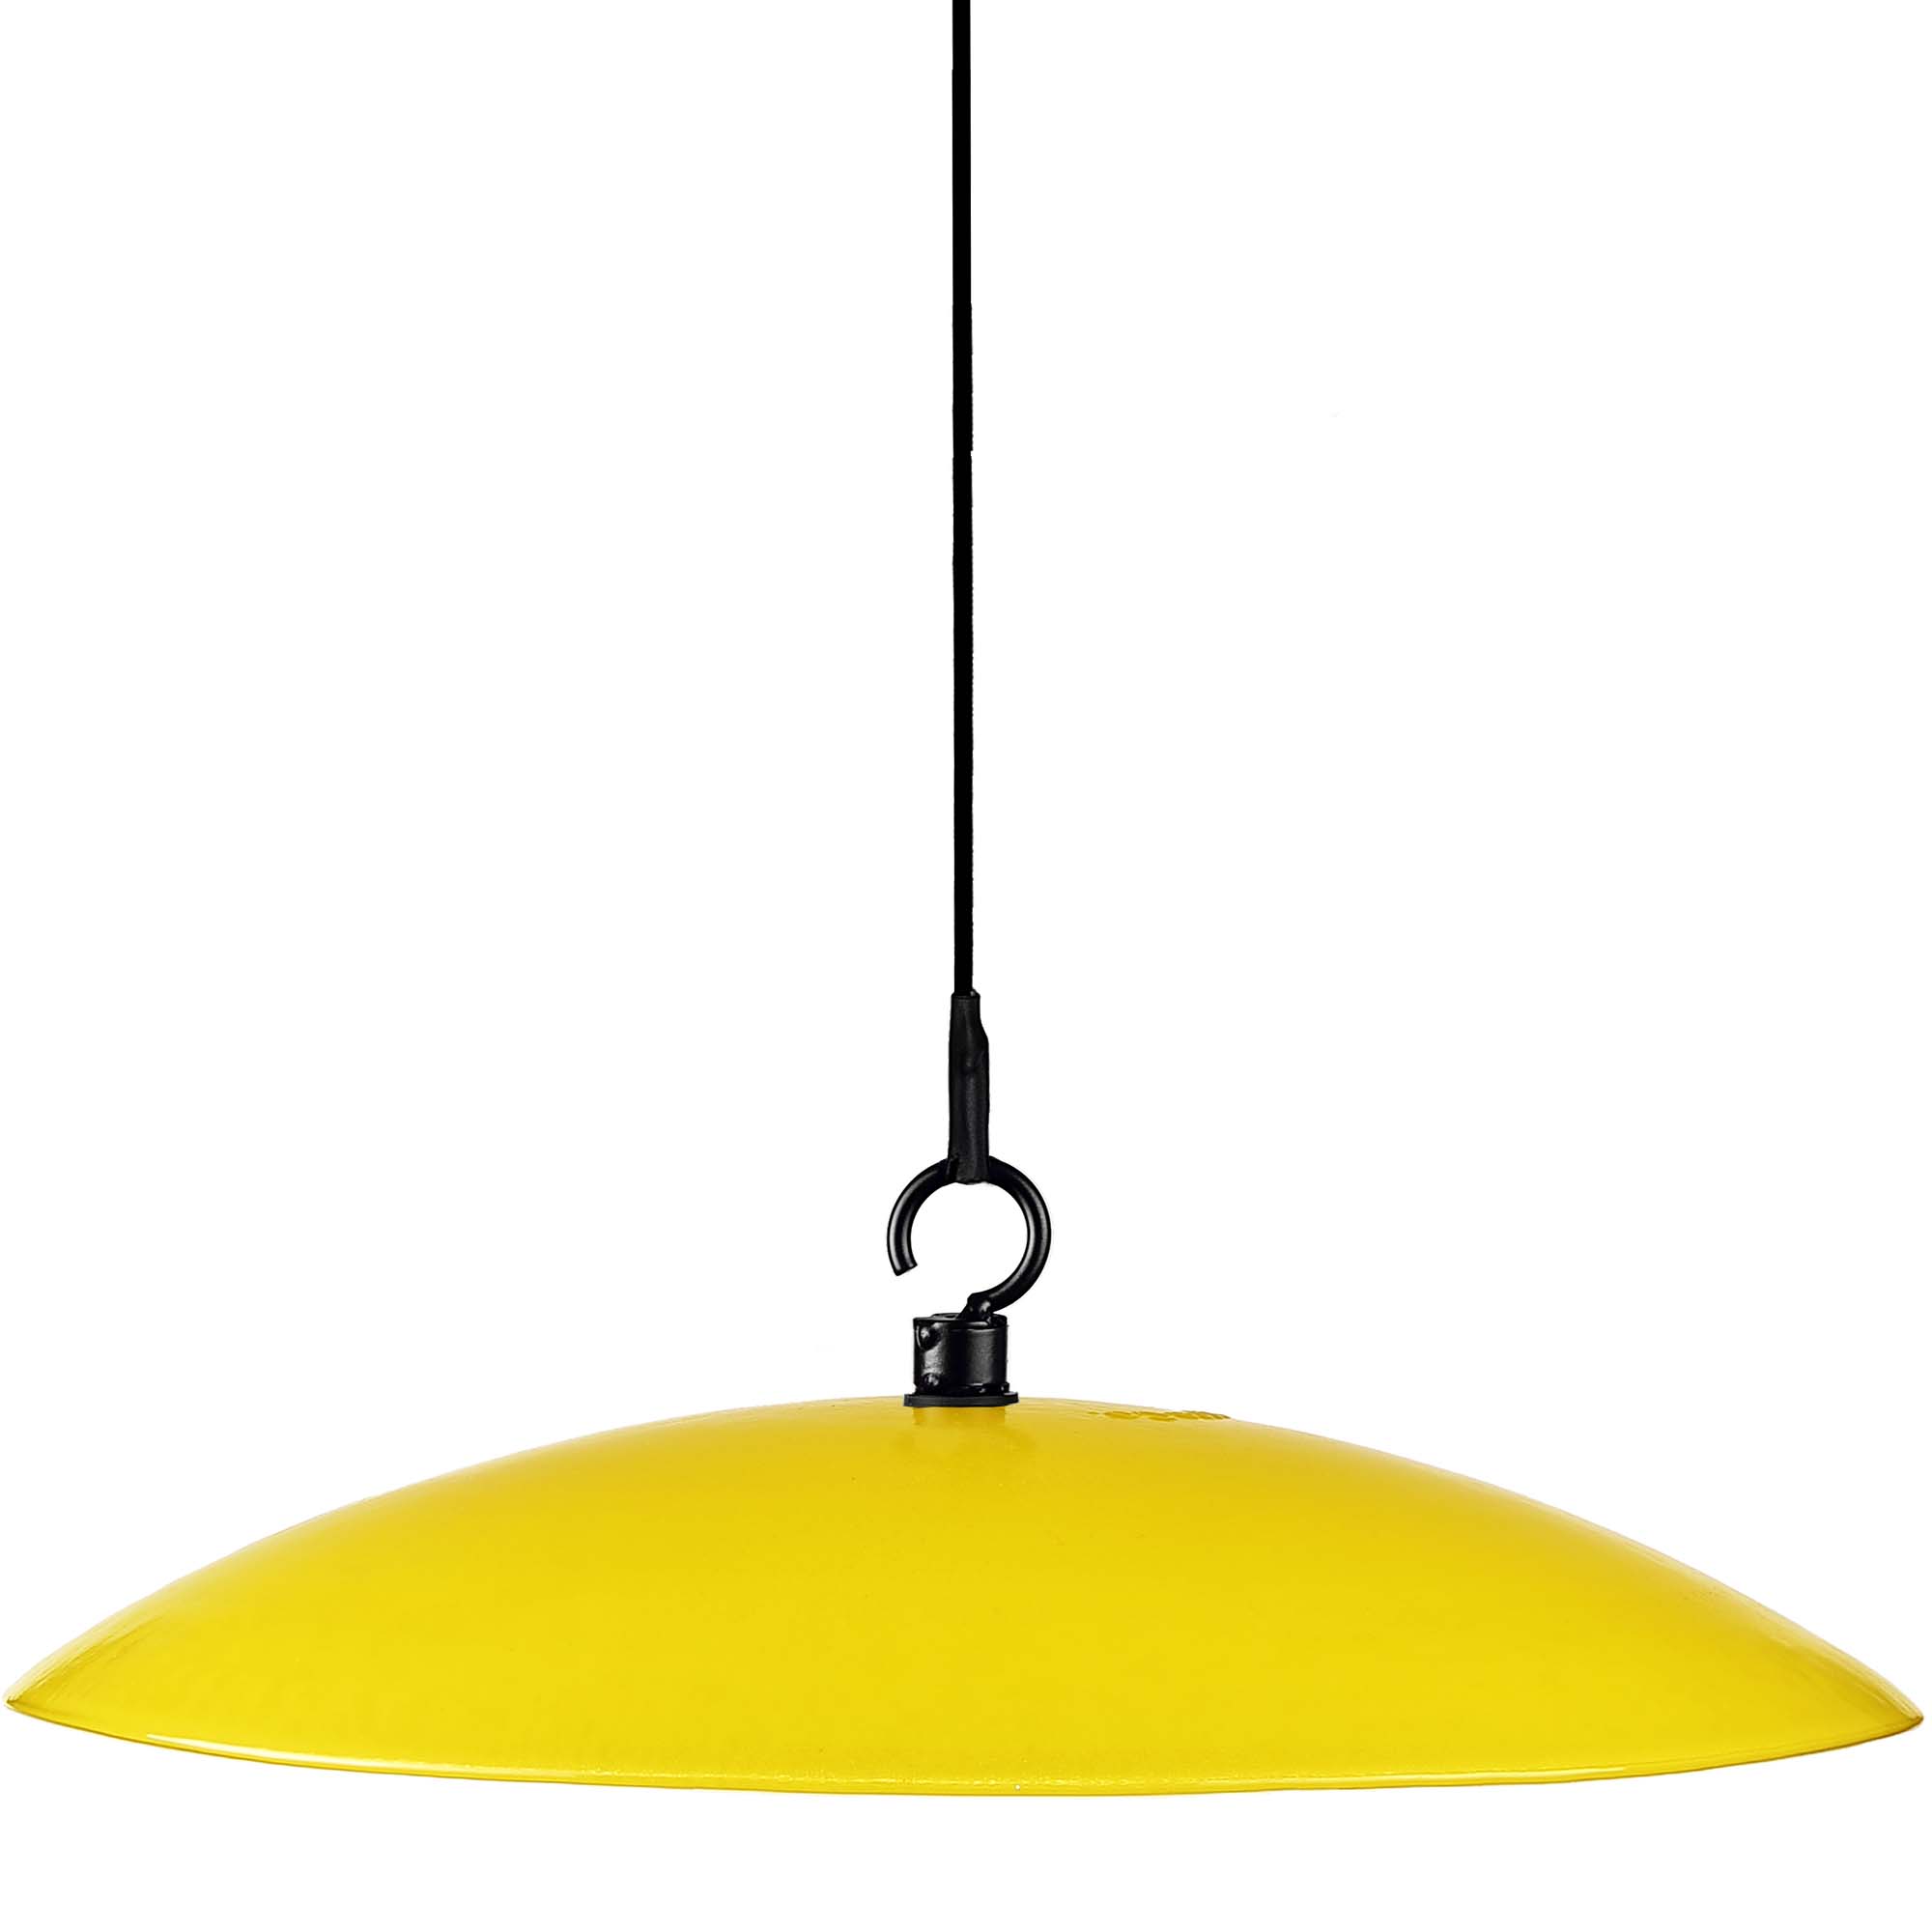 Mosaic Birds Glass Baffle Dome Solid Yellow